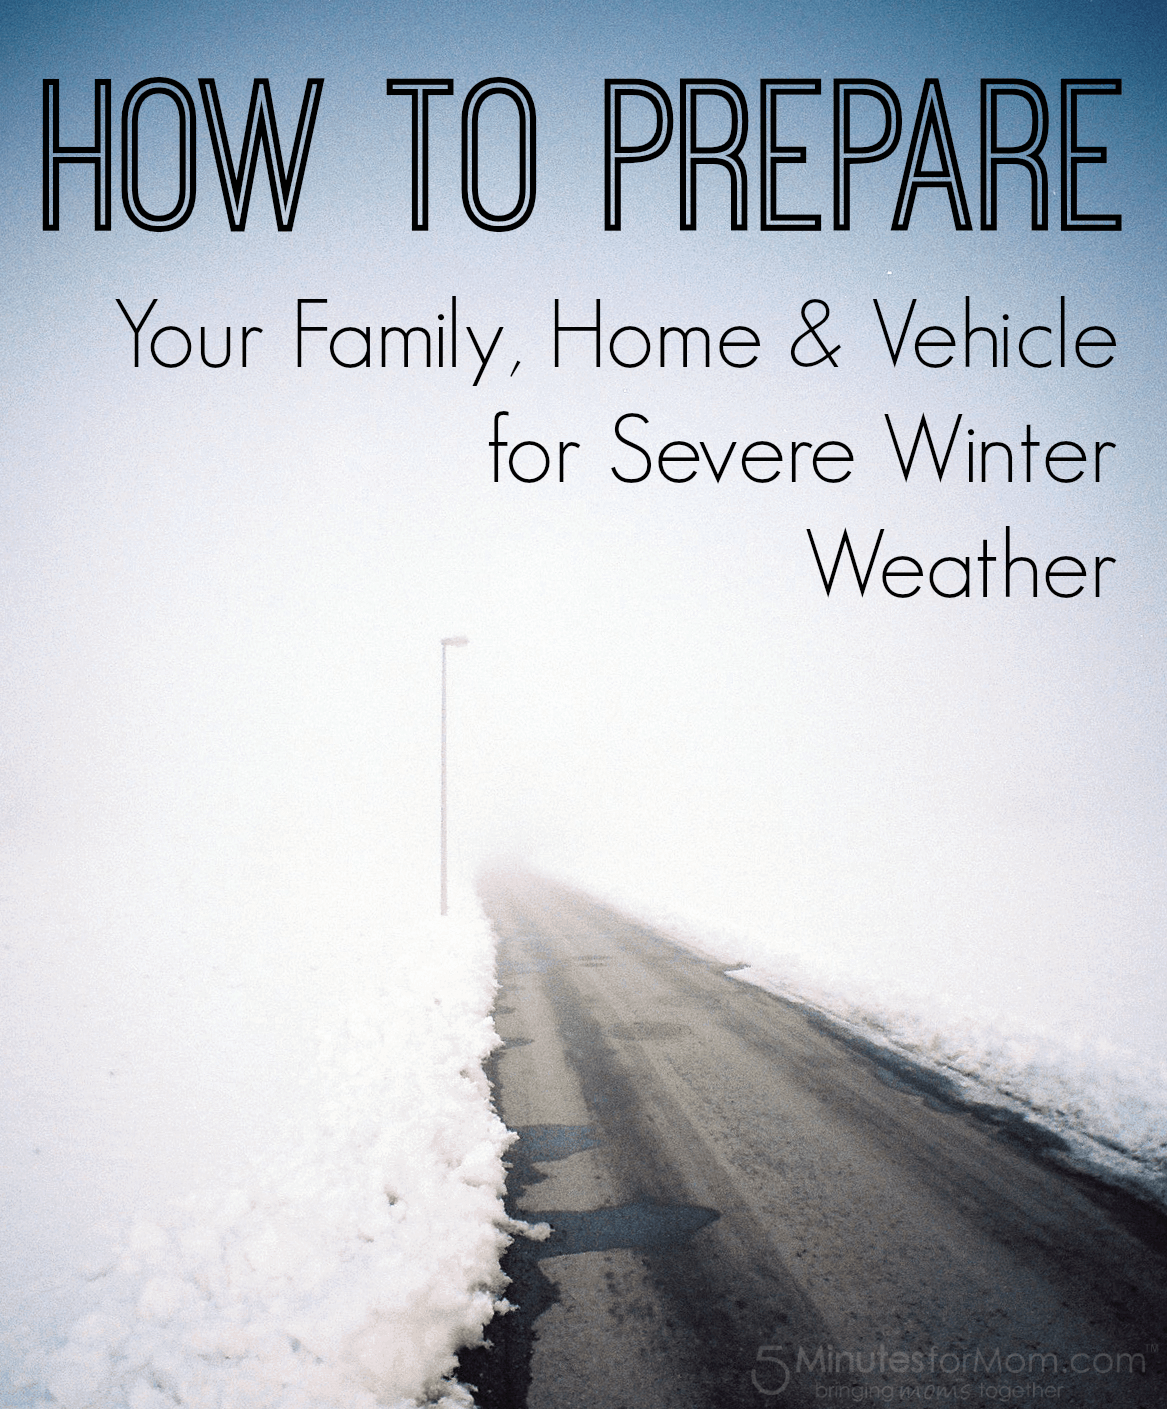 How To Prepare for Winter Weather